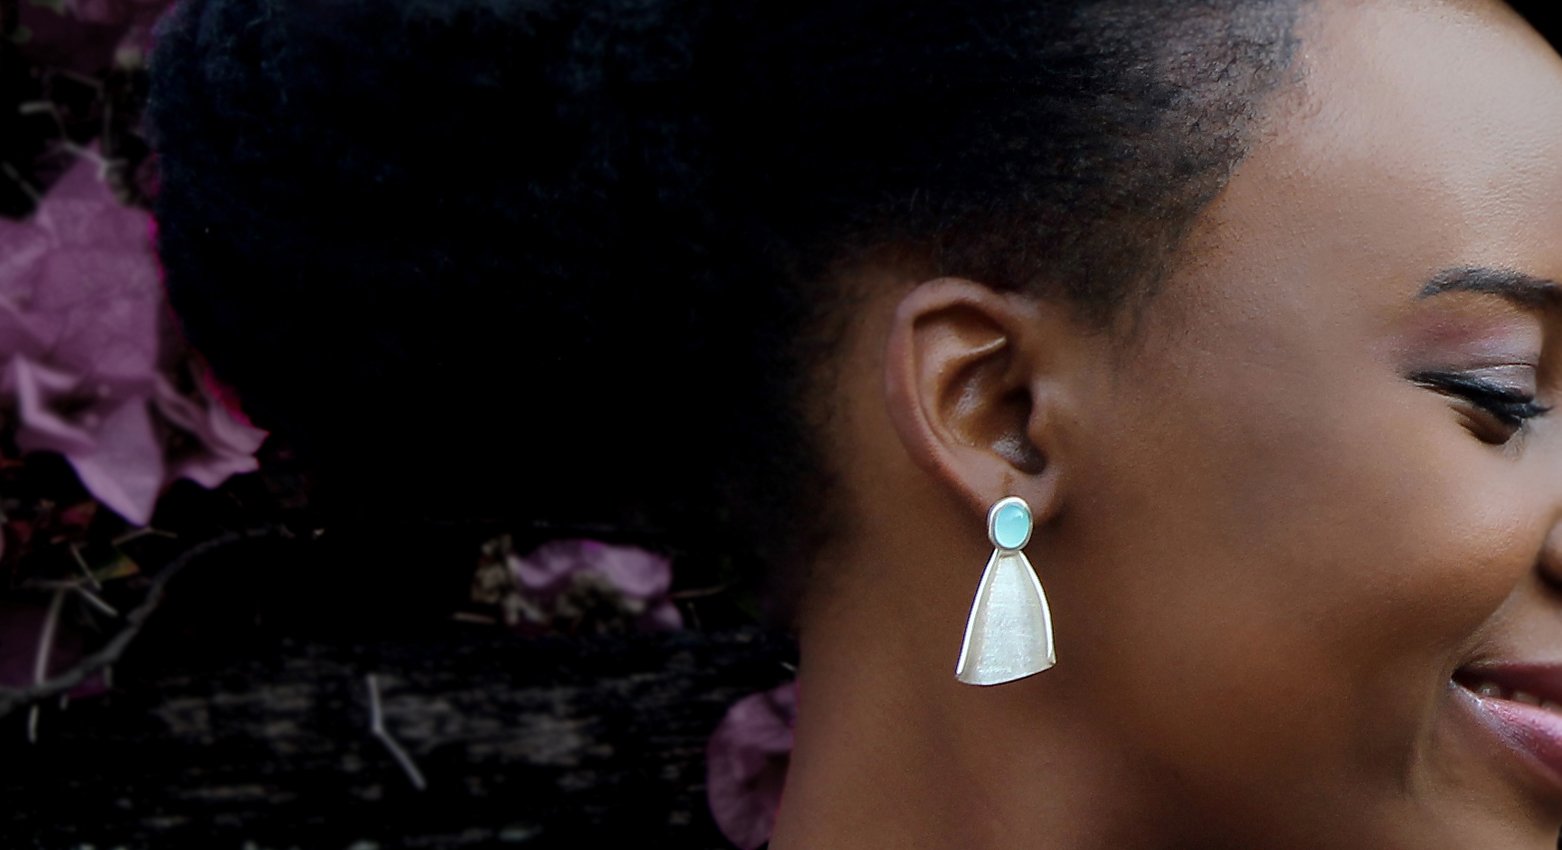 Lady with afro hair and large silver earrings with gemstone